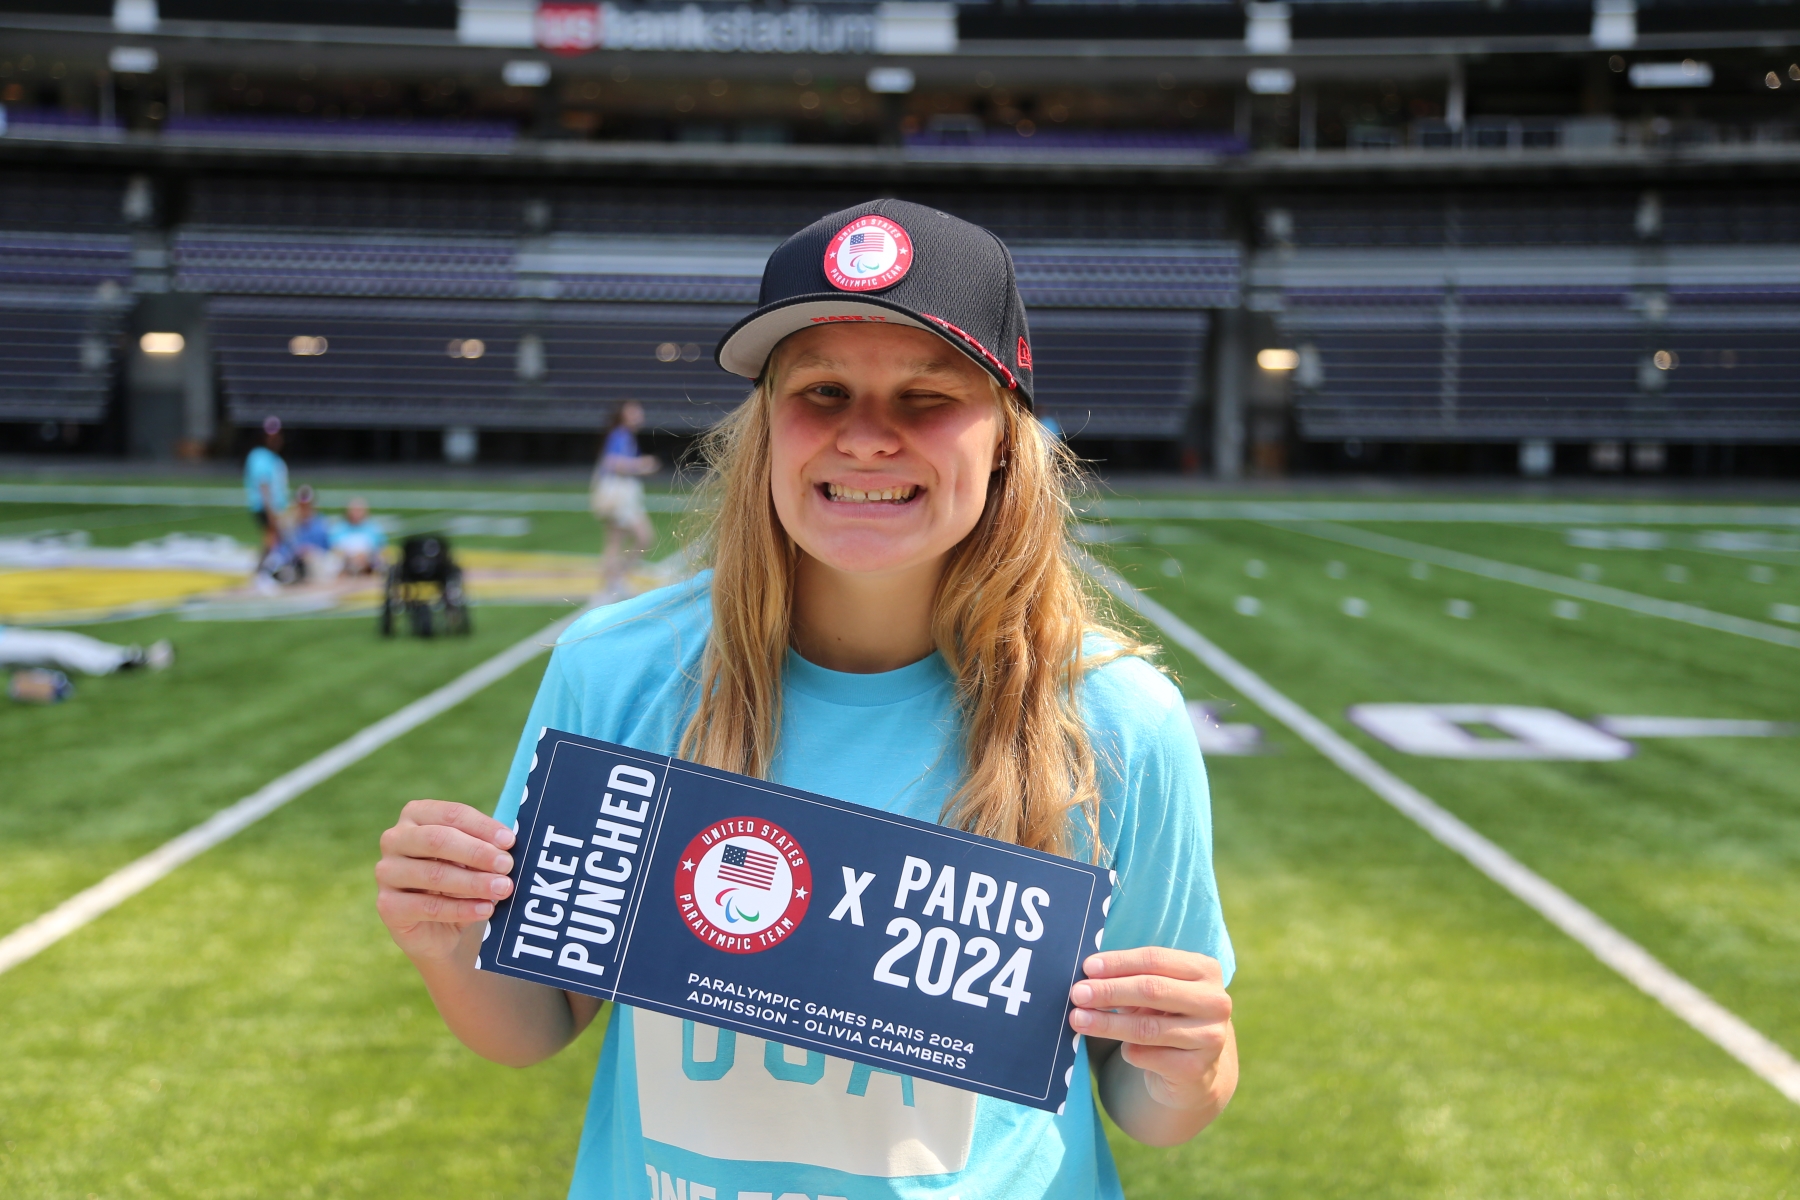 Olivia Chambers holding sign that says "Ticket Punched: Paris 2024"